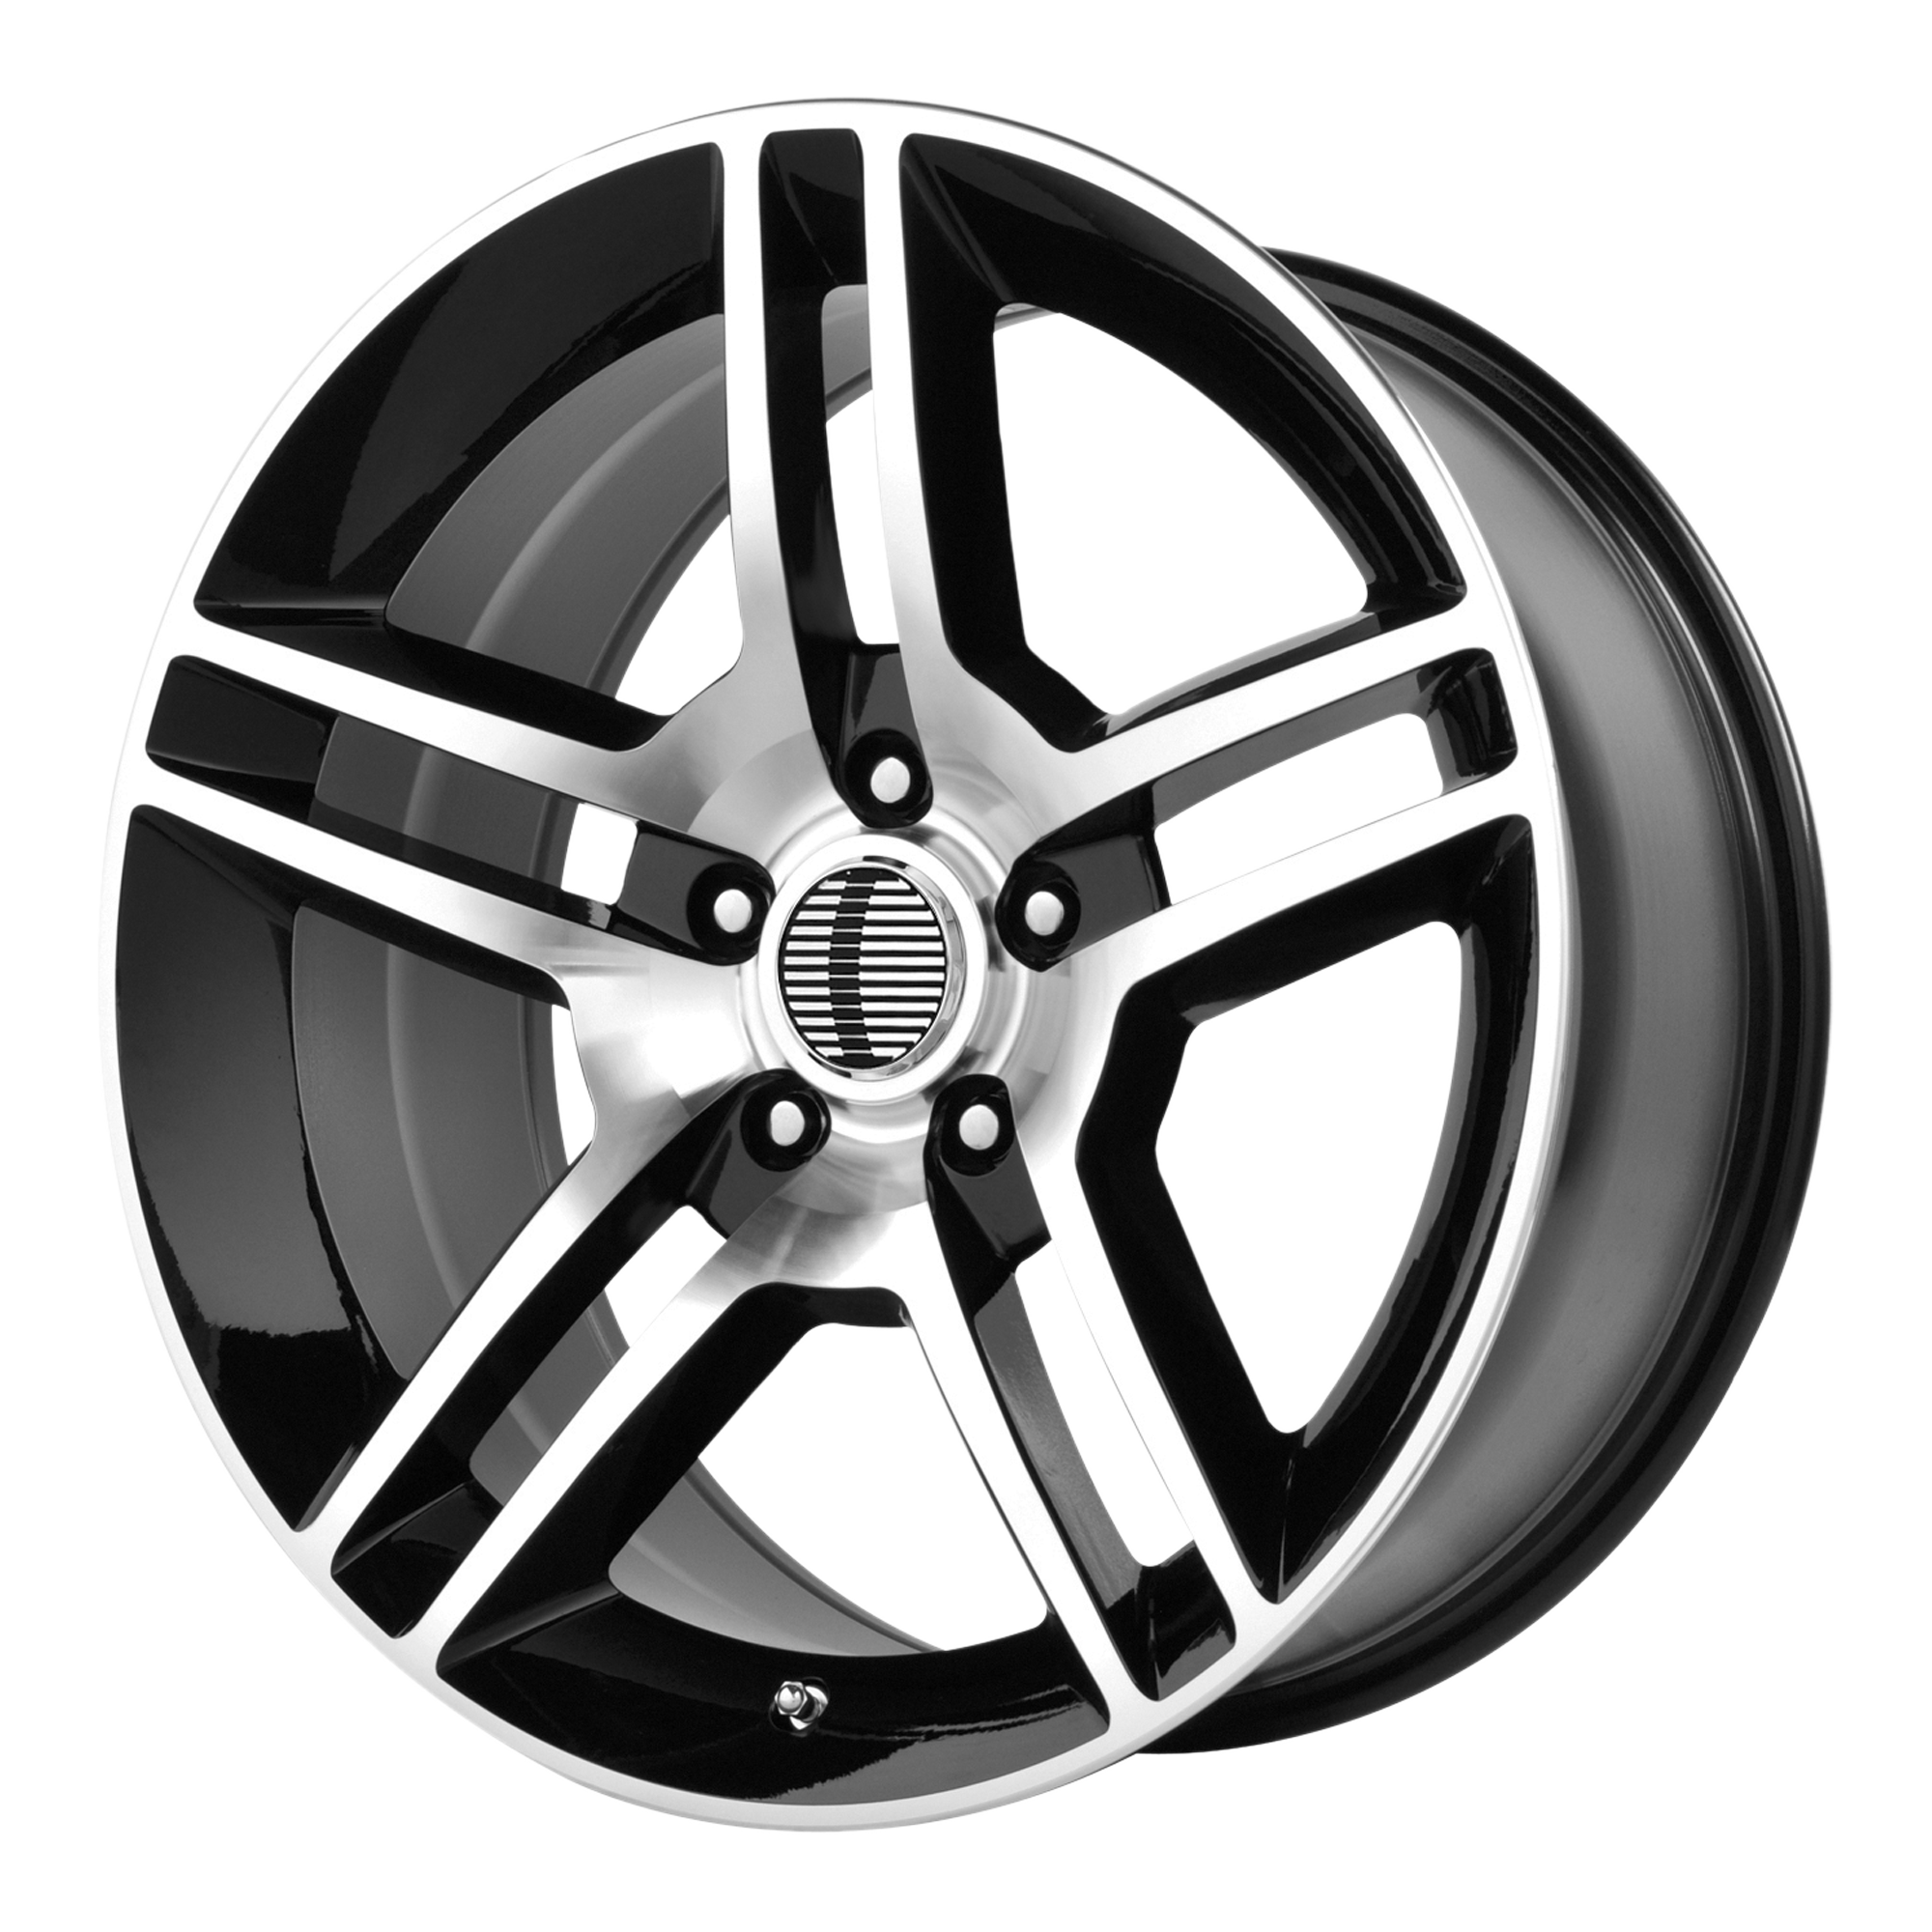 101C 19x8.5 5x114.30 GLOSS BLACK MACHINED (30 mm) - Tires and Engine Performance